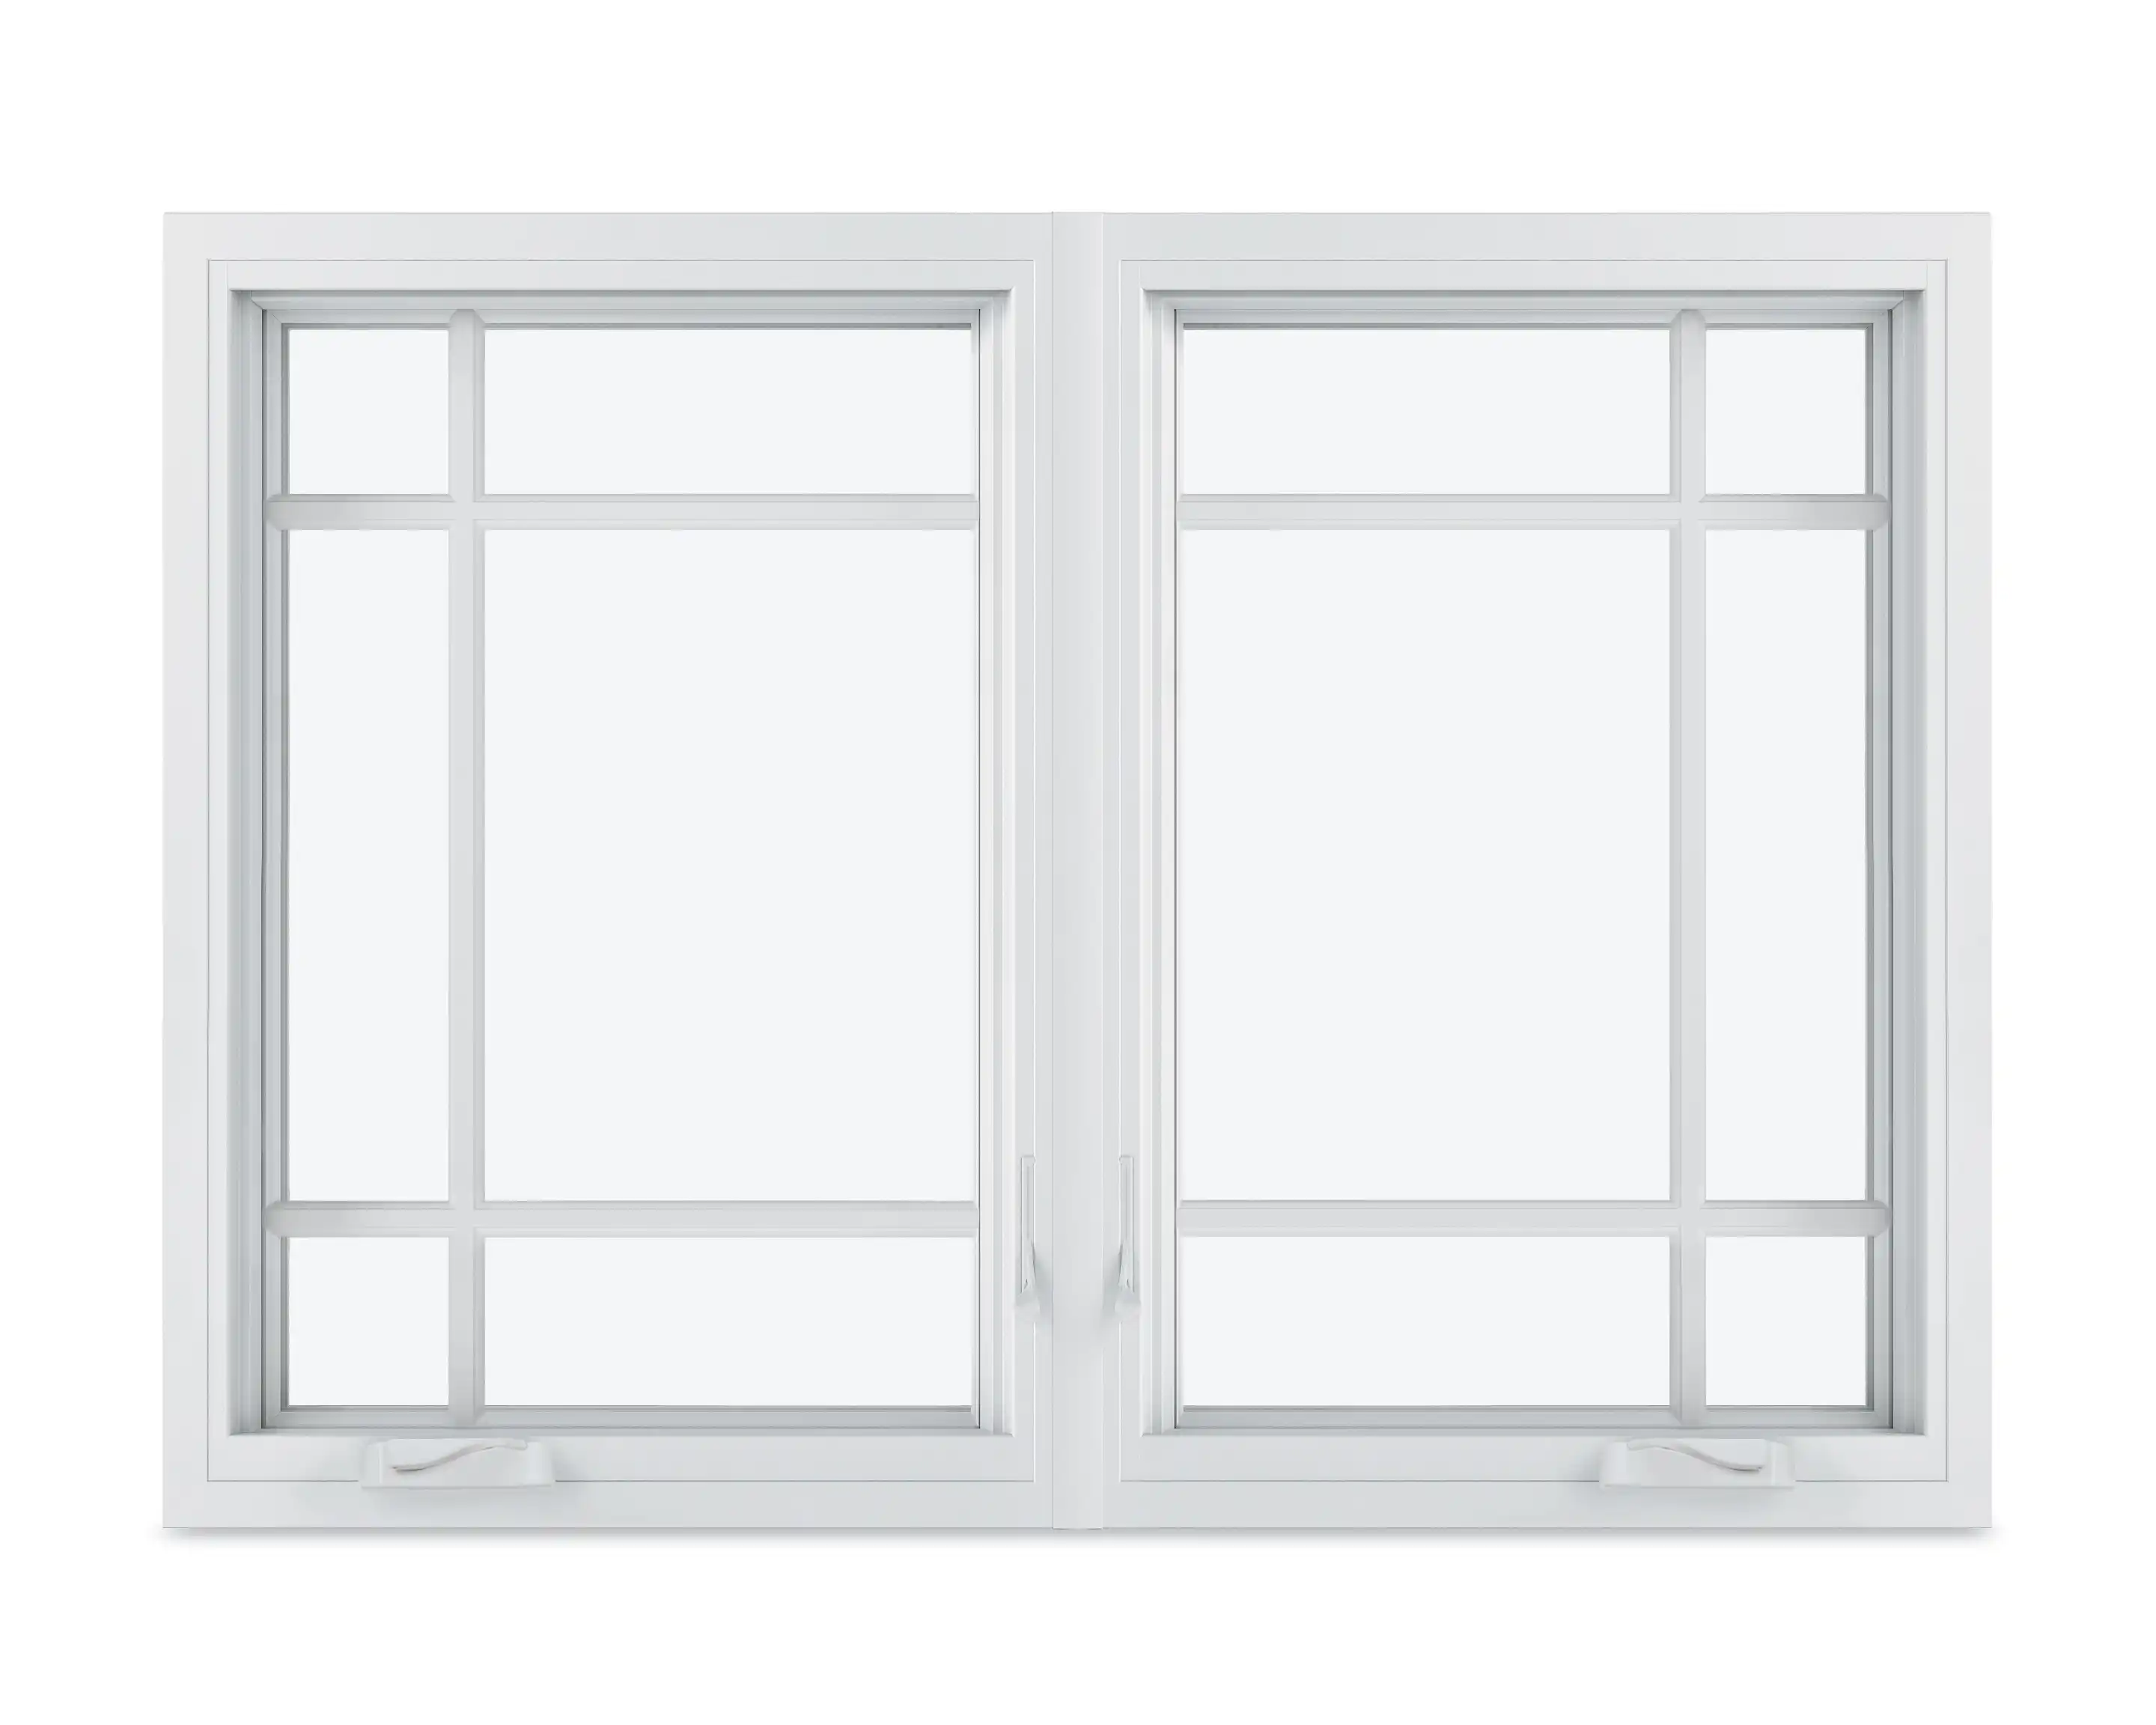 Image of two white Marvin Replacement Casement windows with a Prairie Two-Wide Six-Lite divided lite style.